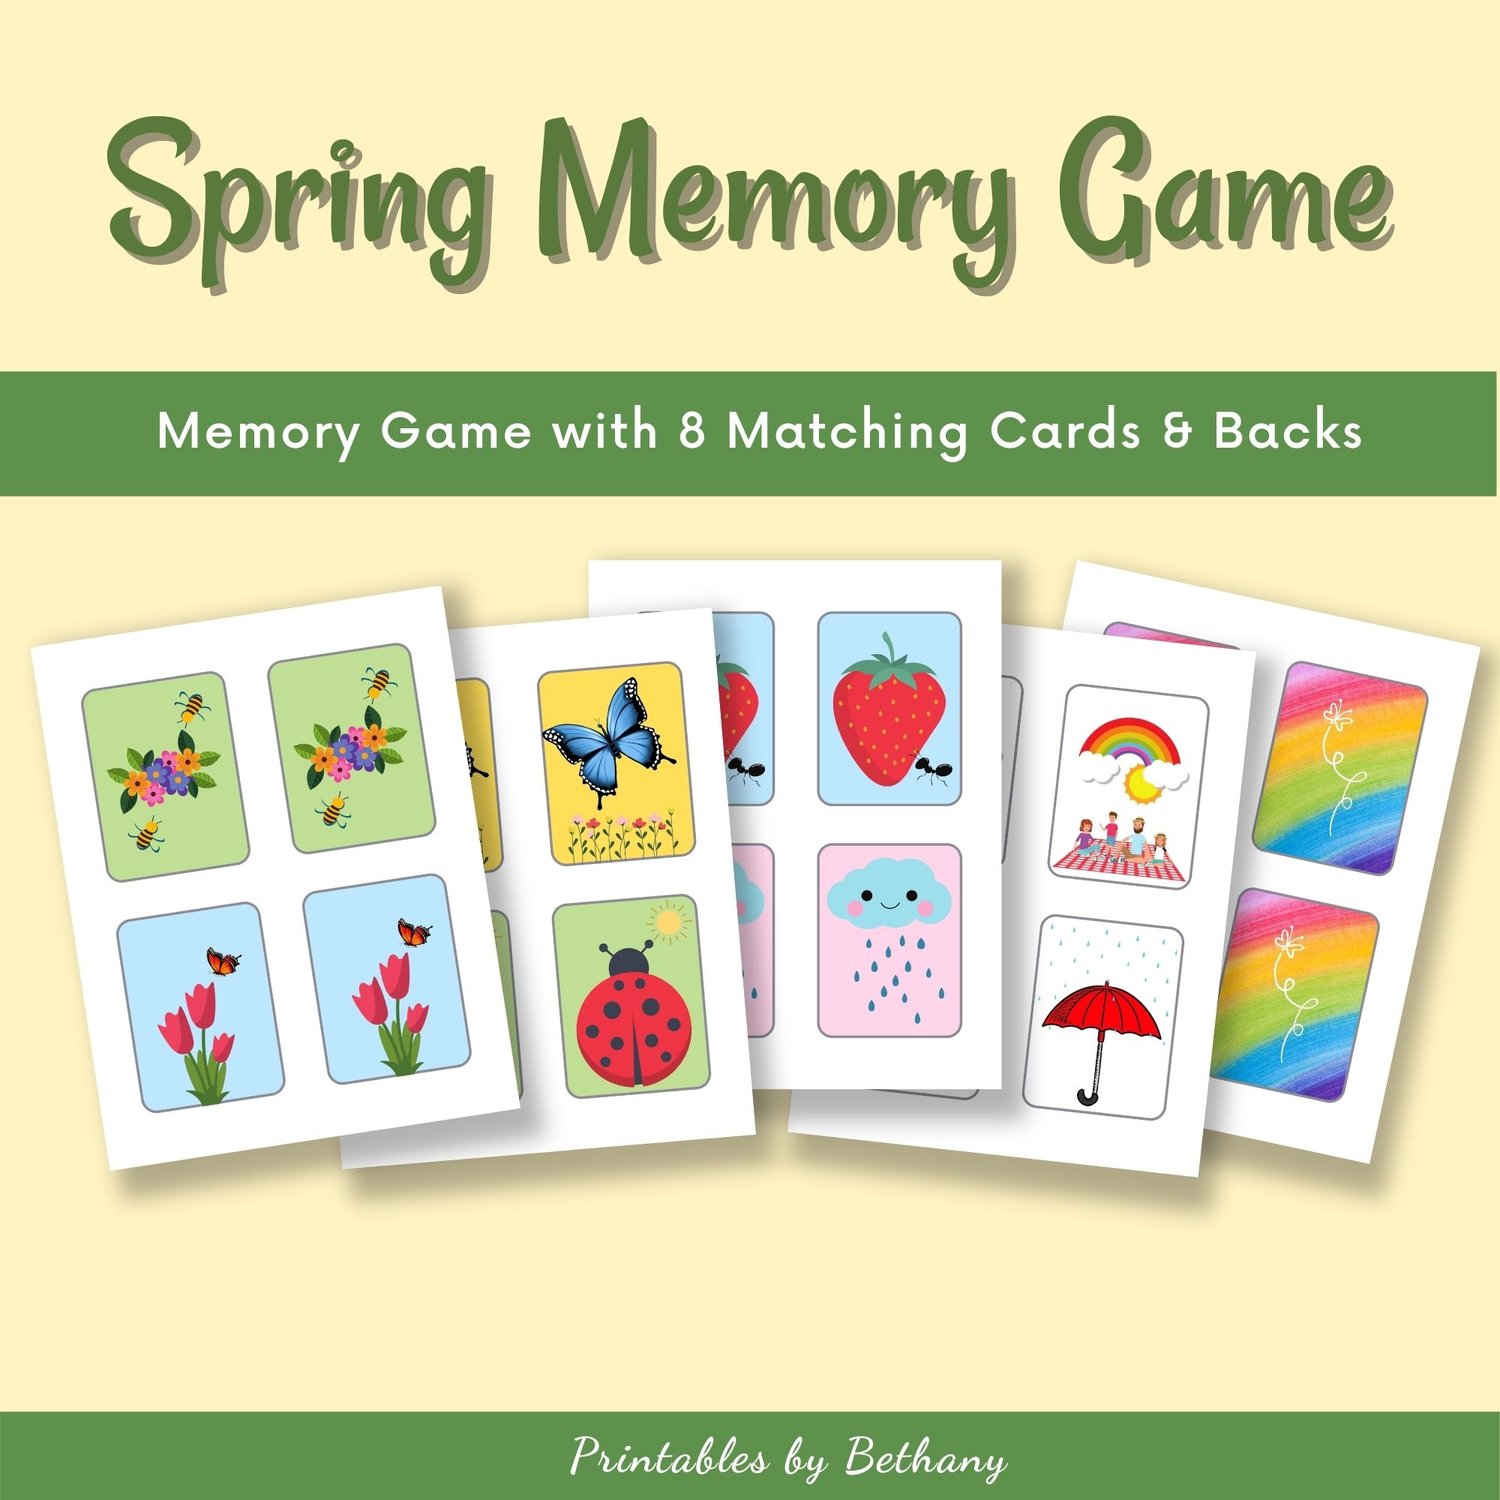 Concentration Card Game - Match the Pair Memory Card Game Online